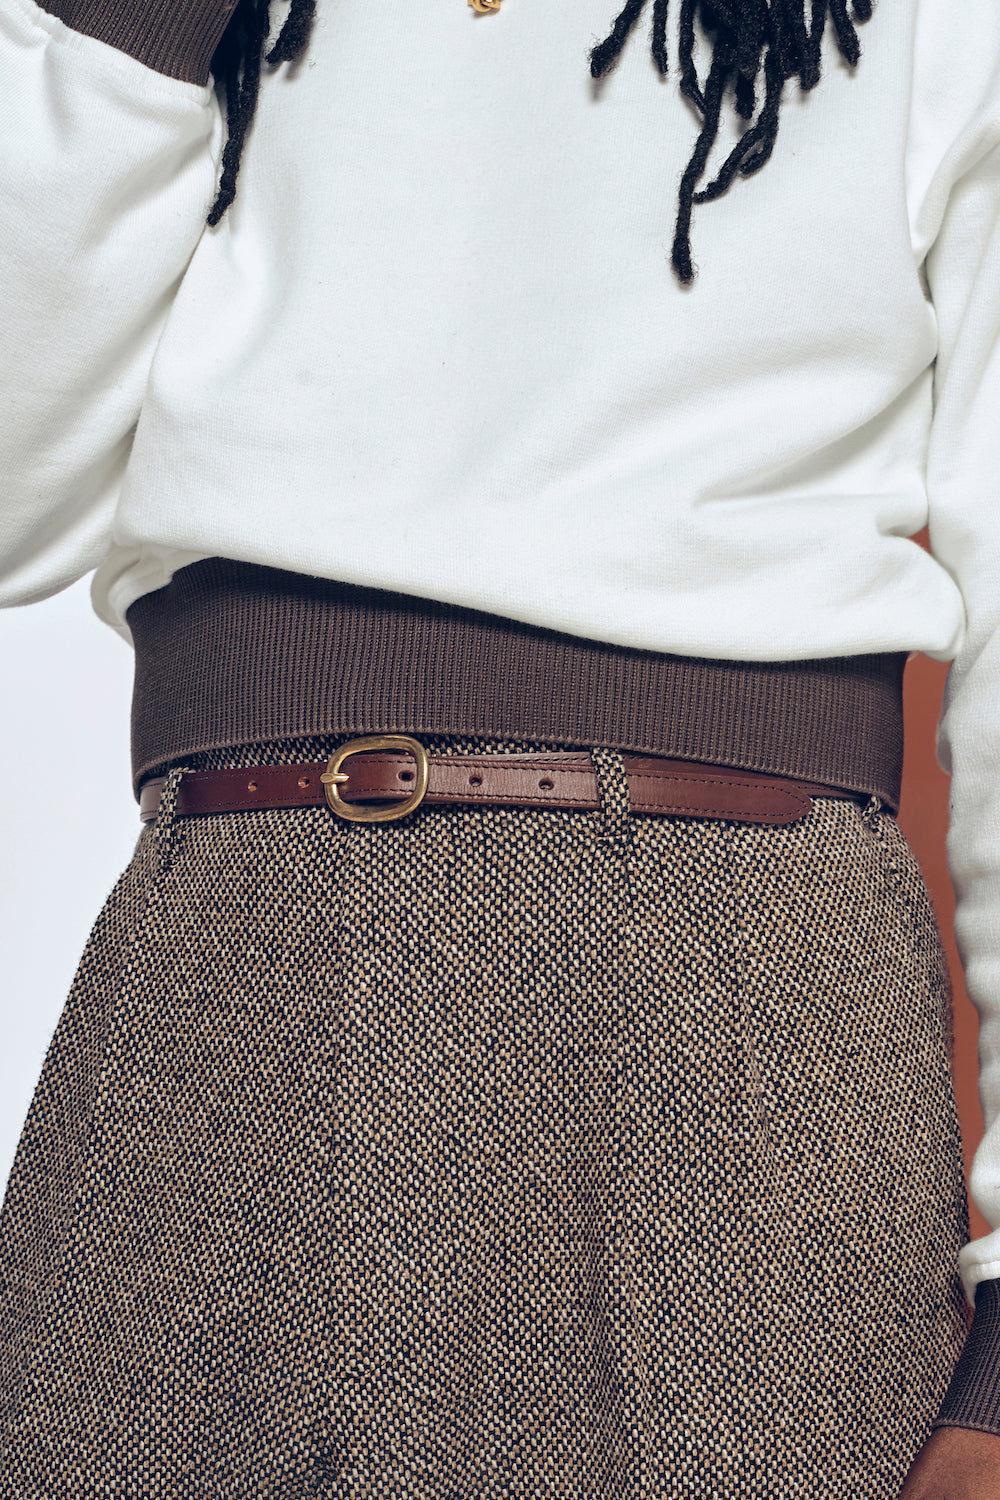 brown belt outfit